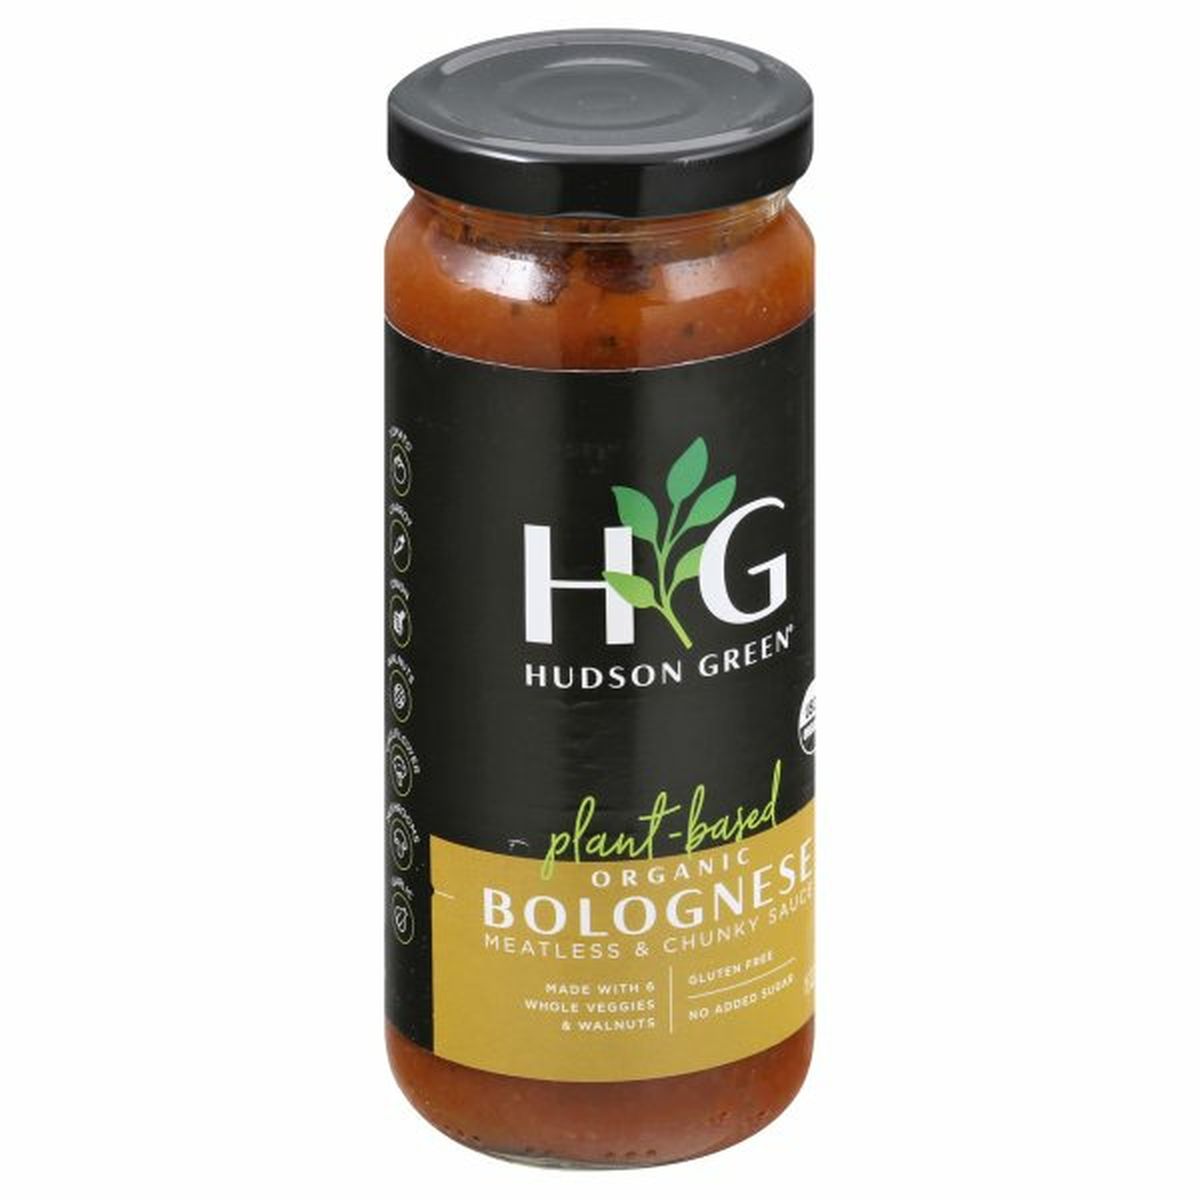 Calories in Hudson Green Bolognese, Organic